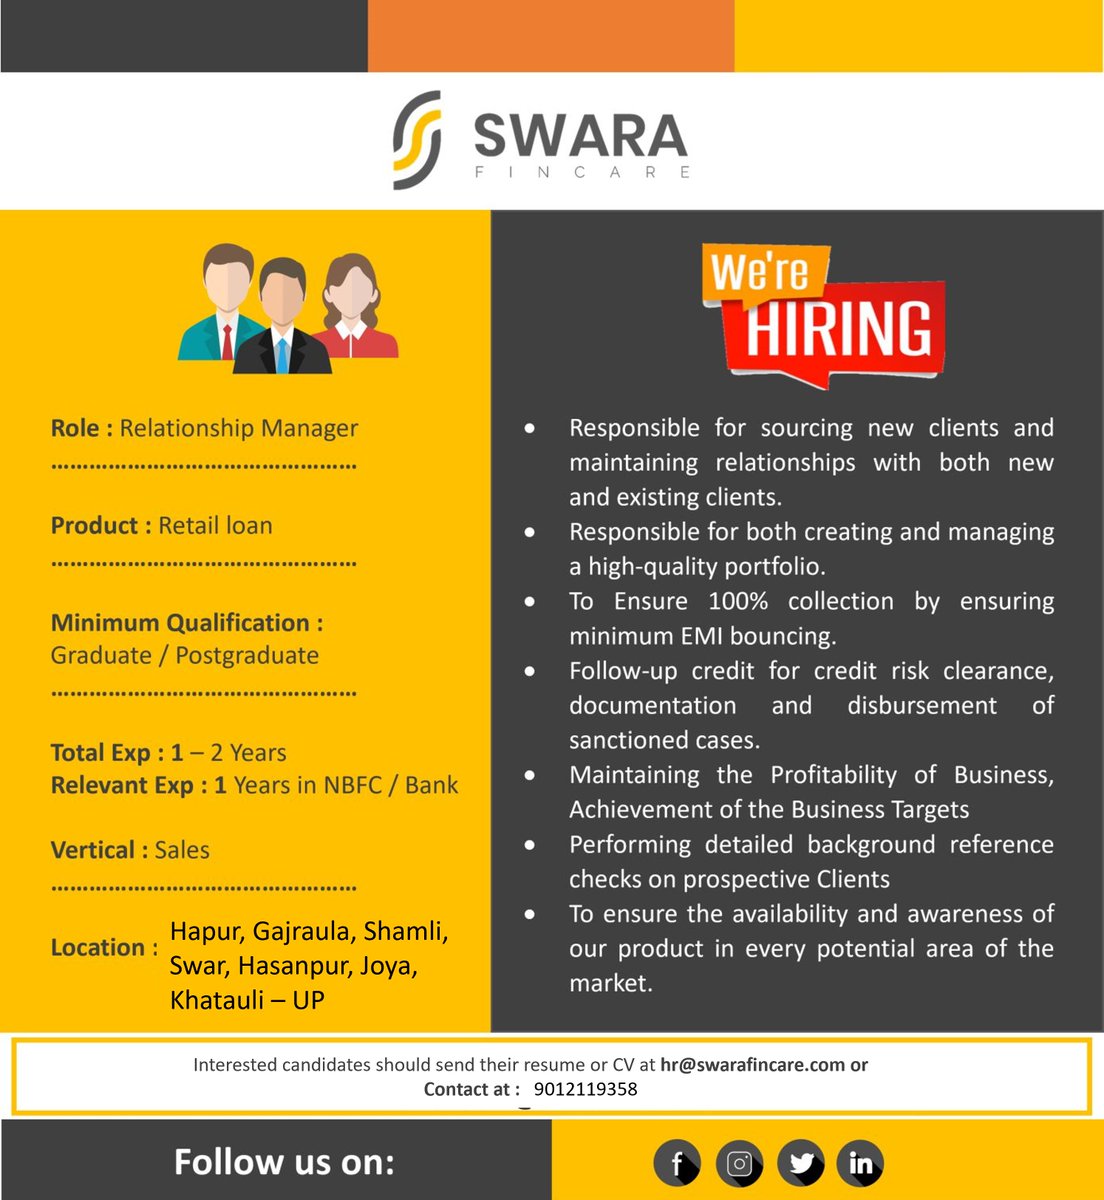 Come and Join Us!
We are Hiring for the profile of Relationship Manager for Individual lending – Unsecured loans.
.
.
.
.
.
#Swarafincare #Swara #NBFC #relationshipmanager #Sales #Salesofficer #salesmanager #fieldofficer #Wearehiring #jobopening #JobAlert #Hiring #jobopportunity